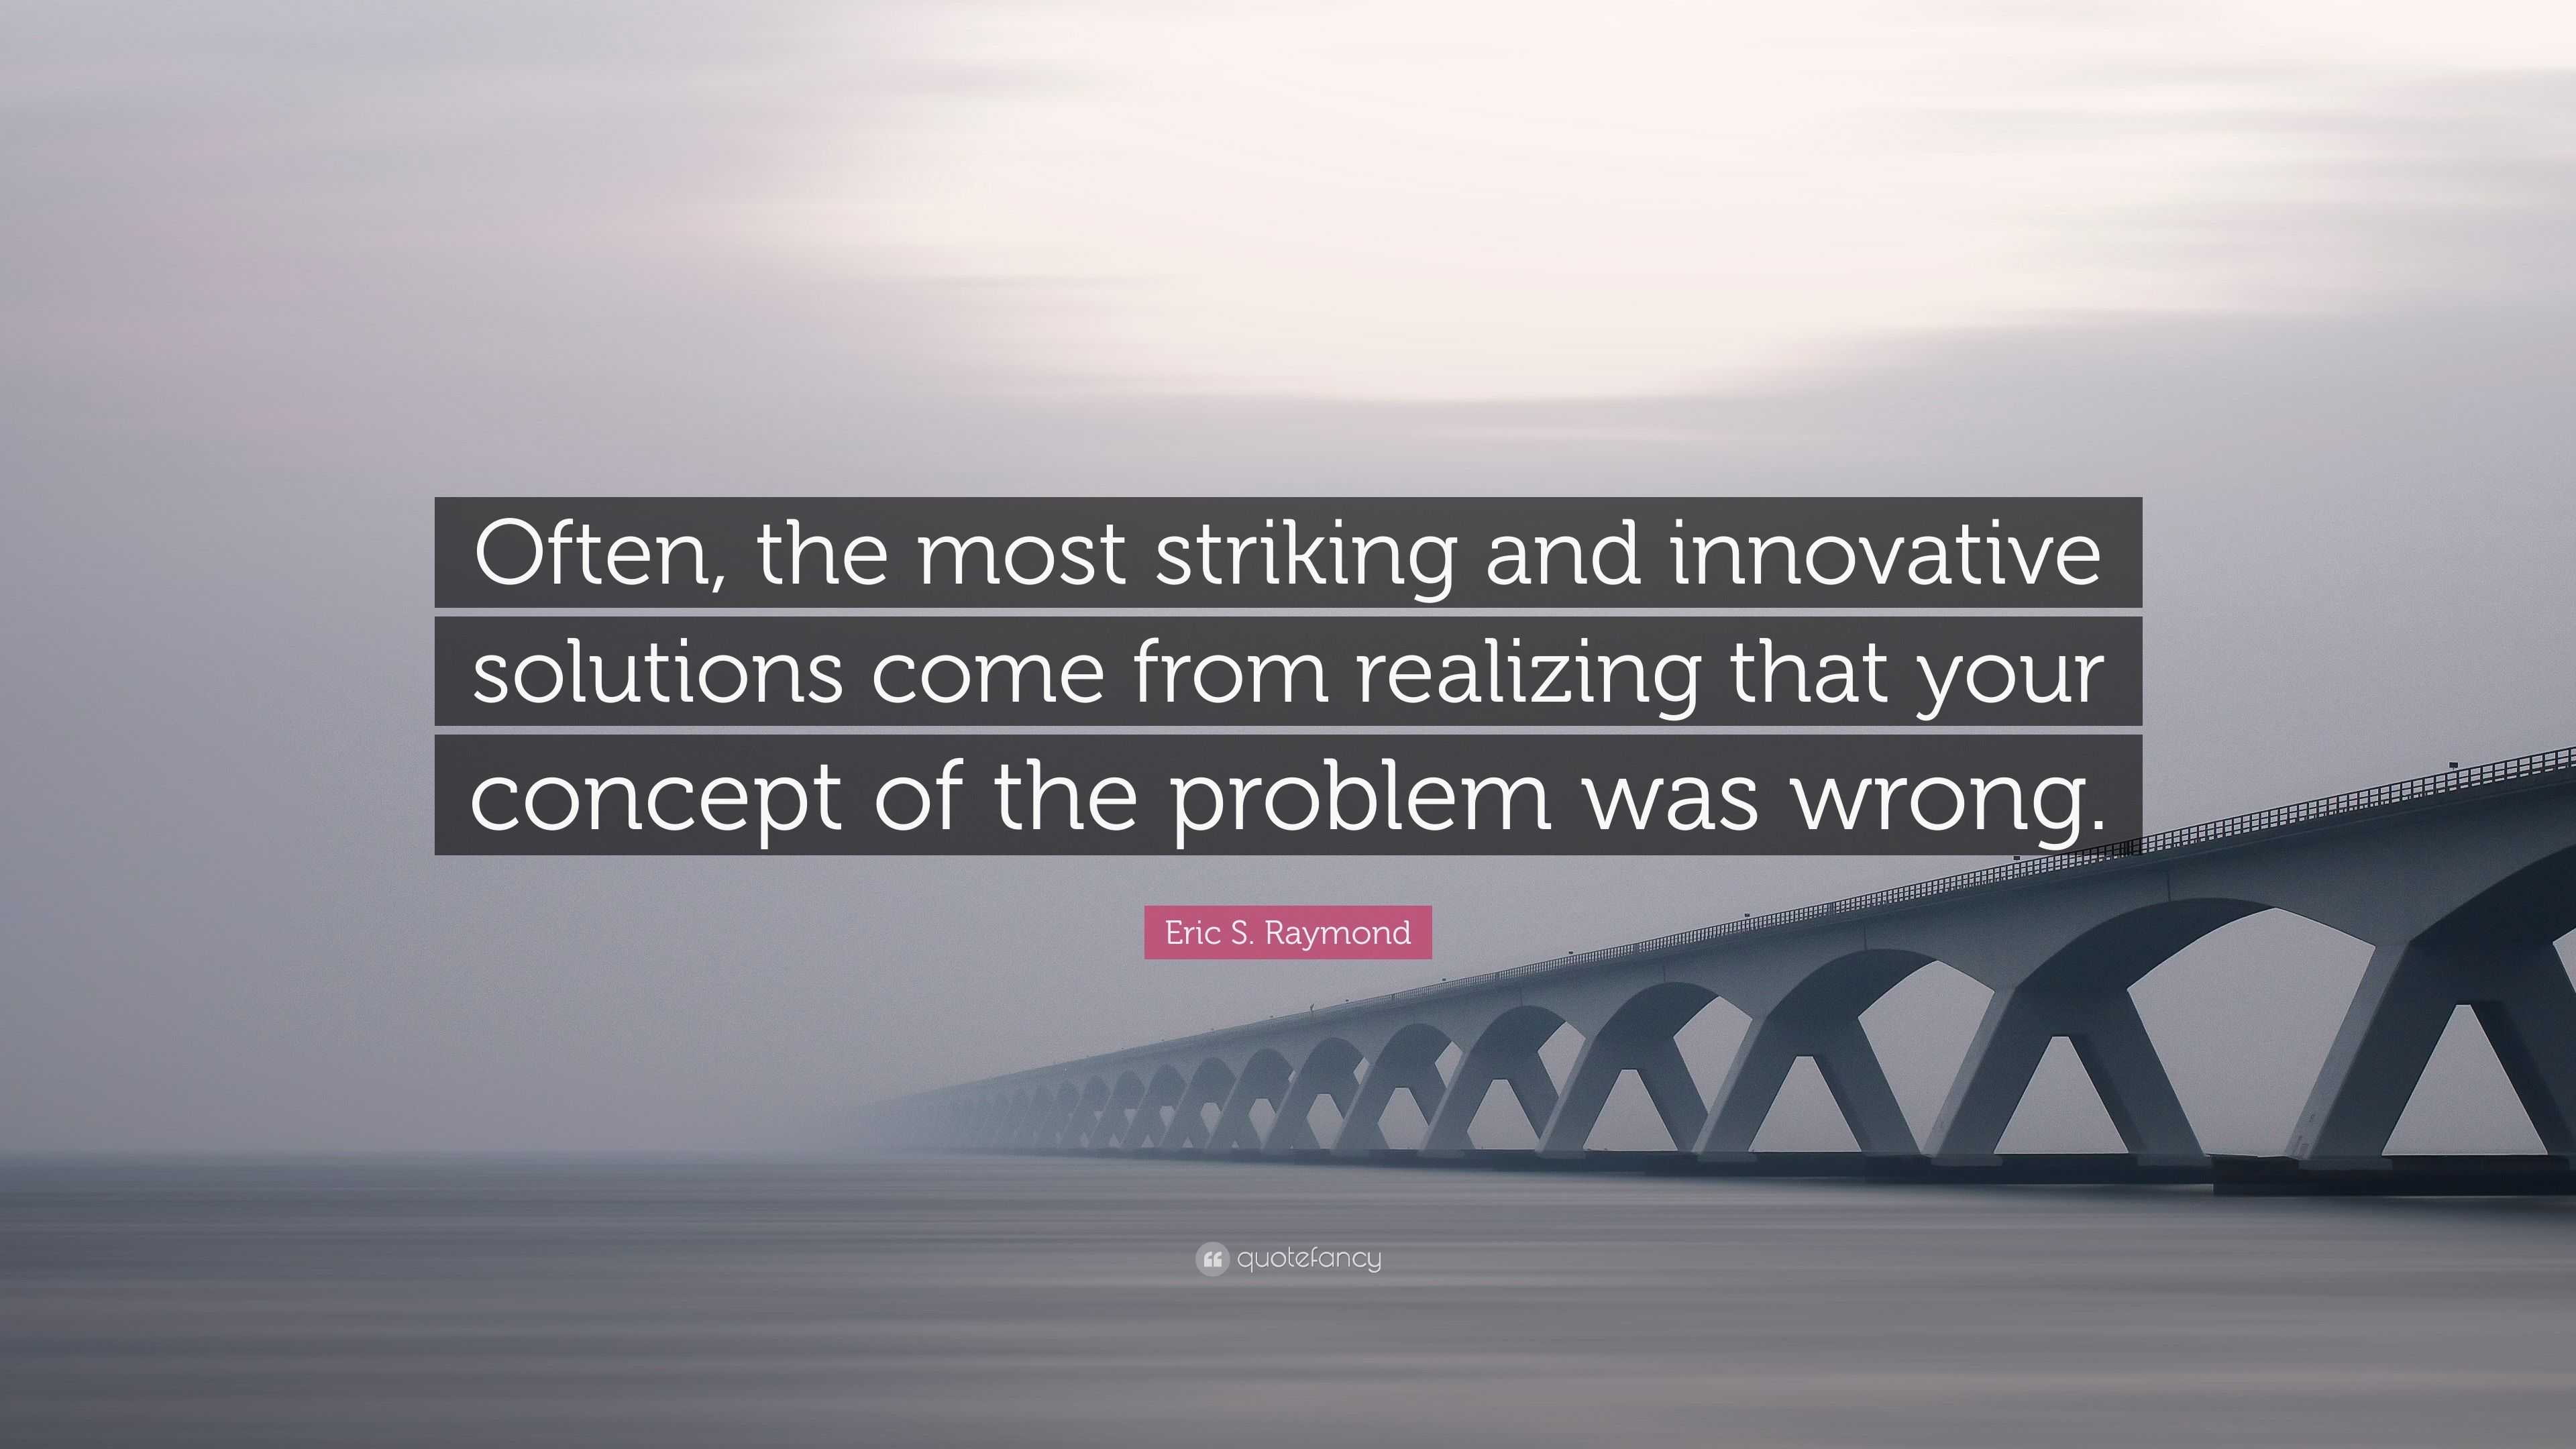 Eric S. Raymond Quote: “Often, the most striking and innovative ...